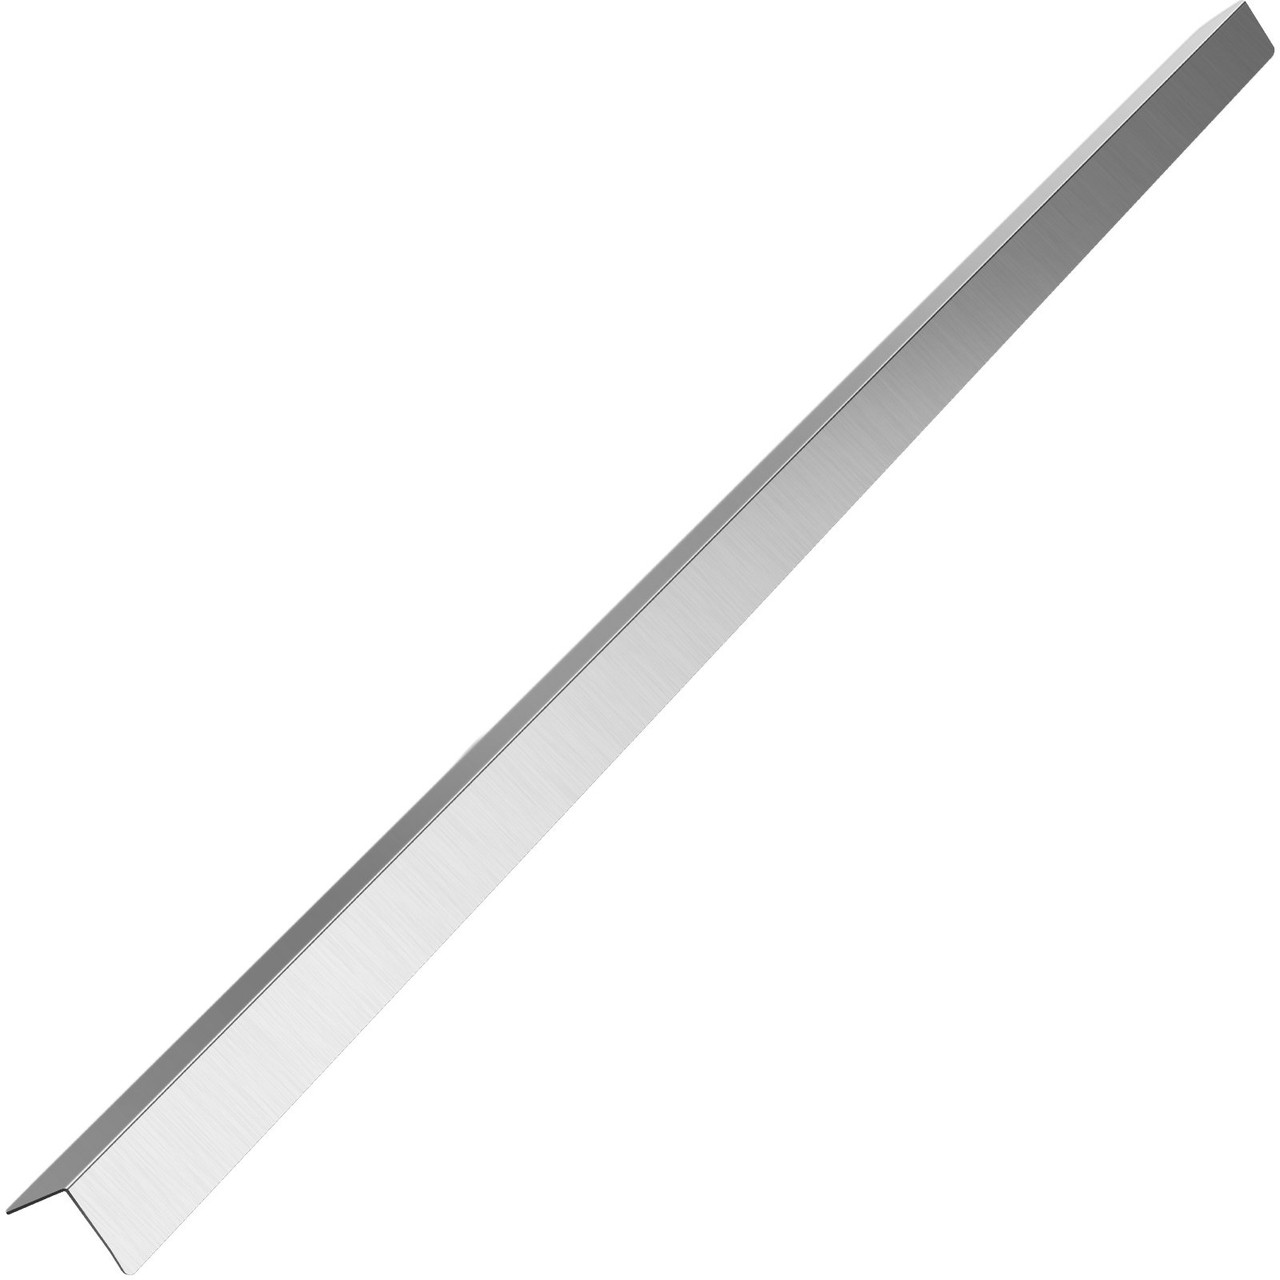 Stainless Steel Corner Guards 0.5 x 0.5 x 48 inch Metal Wall Corner Protector Pack of 10 Corner Guards 20 Ga 304 Stainless Corner Guard with 90-Degree Angle for Wall Protection and Decoration